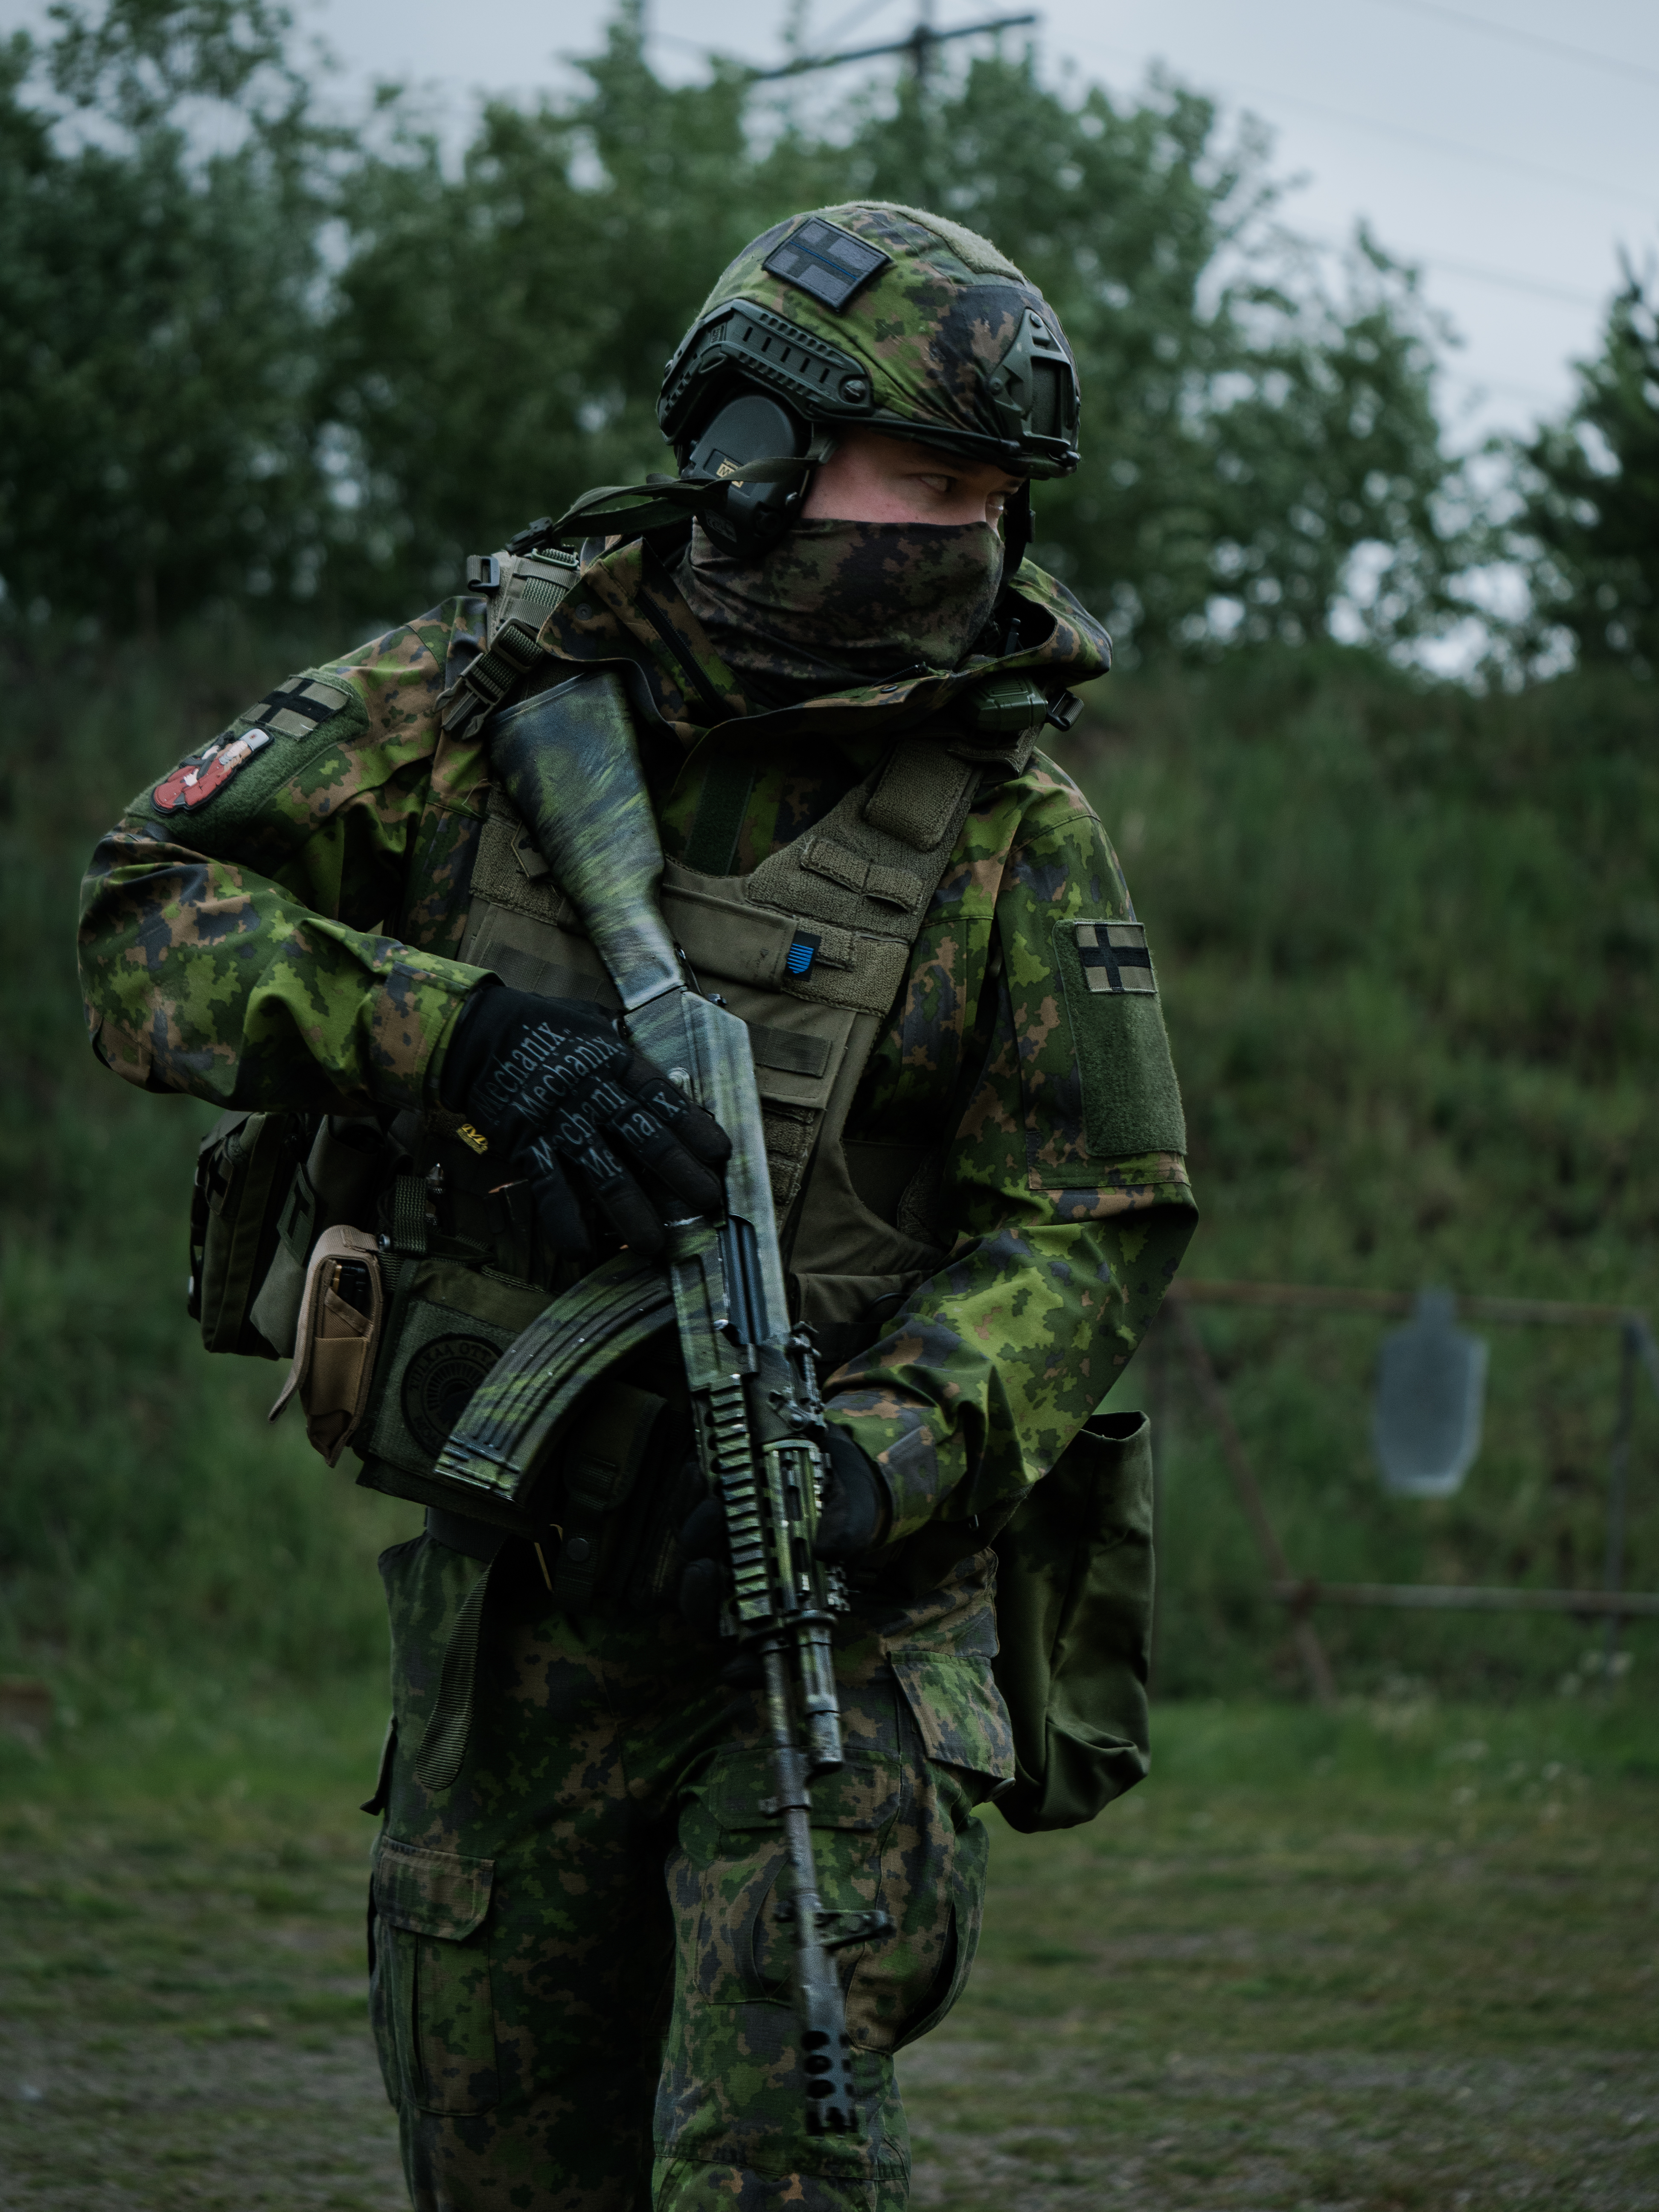 Man is turning around with rifle. Reservist. He is wearing a M05 camo jacket and M05 combat pants. He has a ballistic helmet. He has a ak-47 rifle. He is on a shooting range. He has a Finnish flag and other patches on his arm.